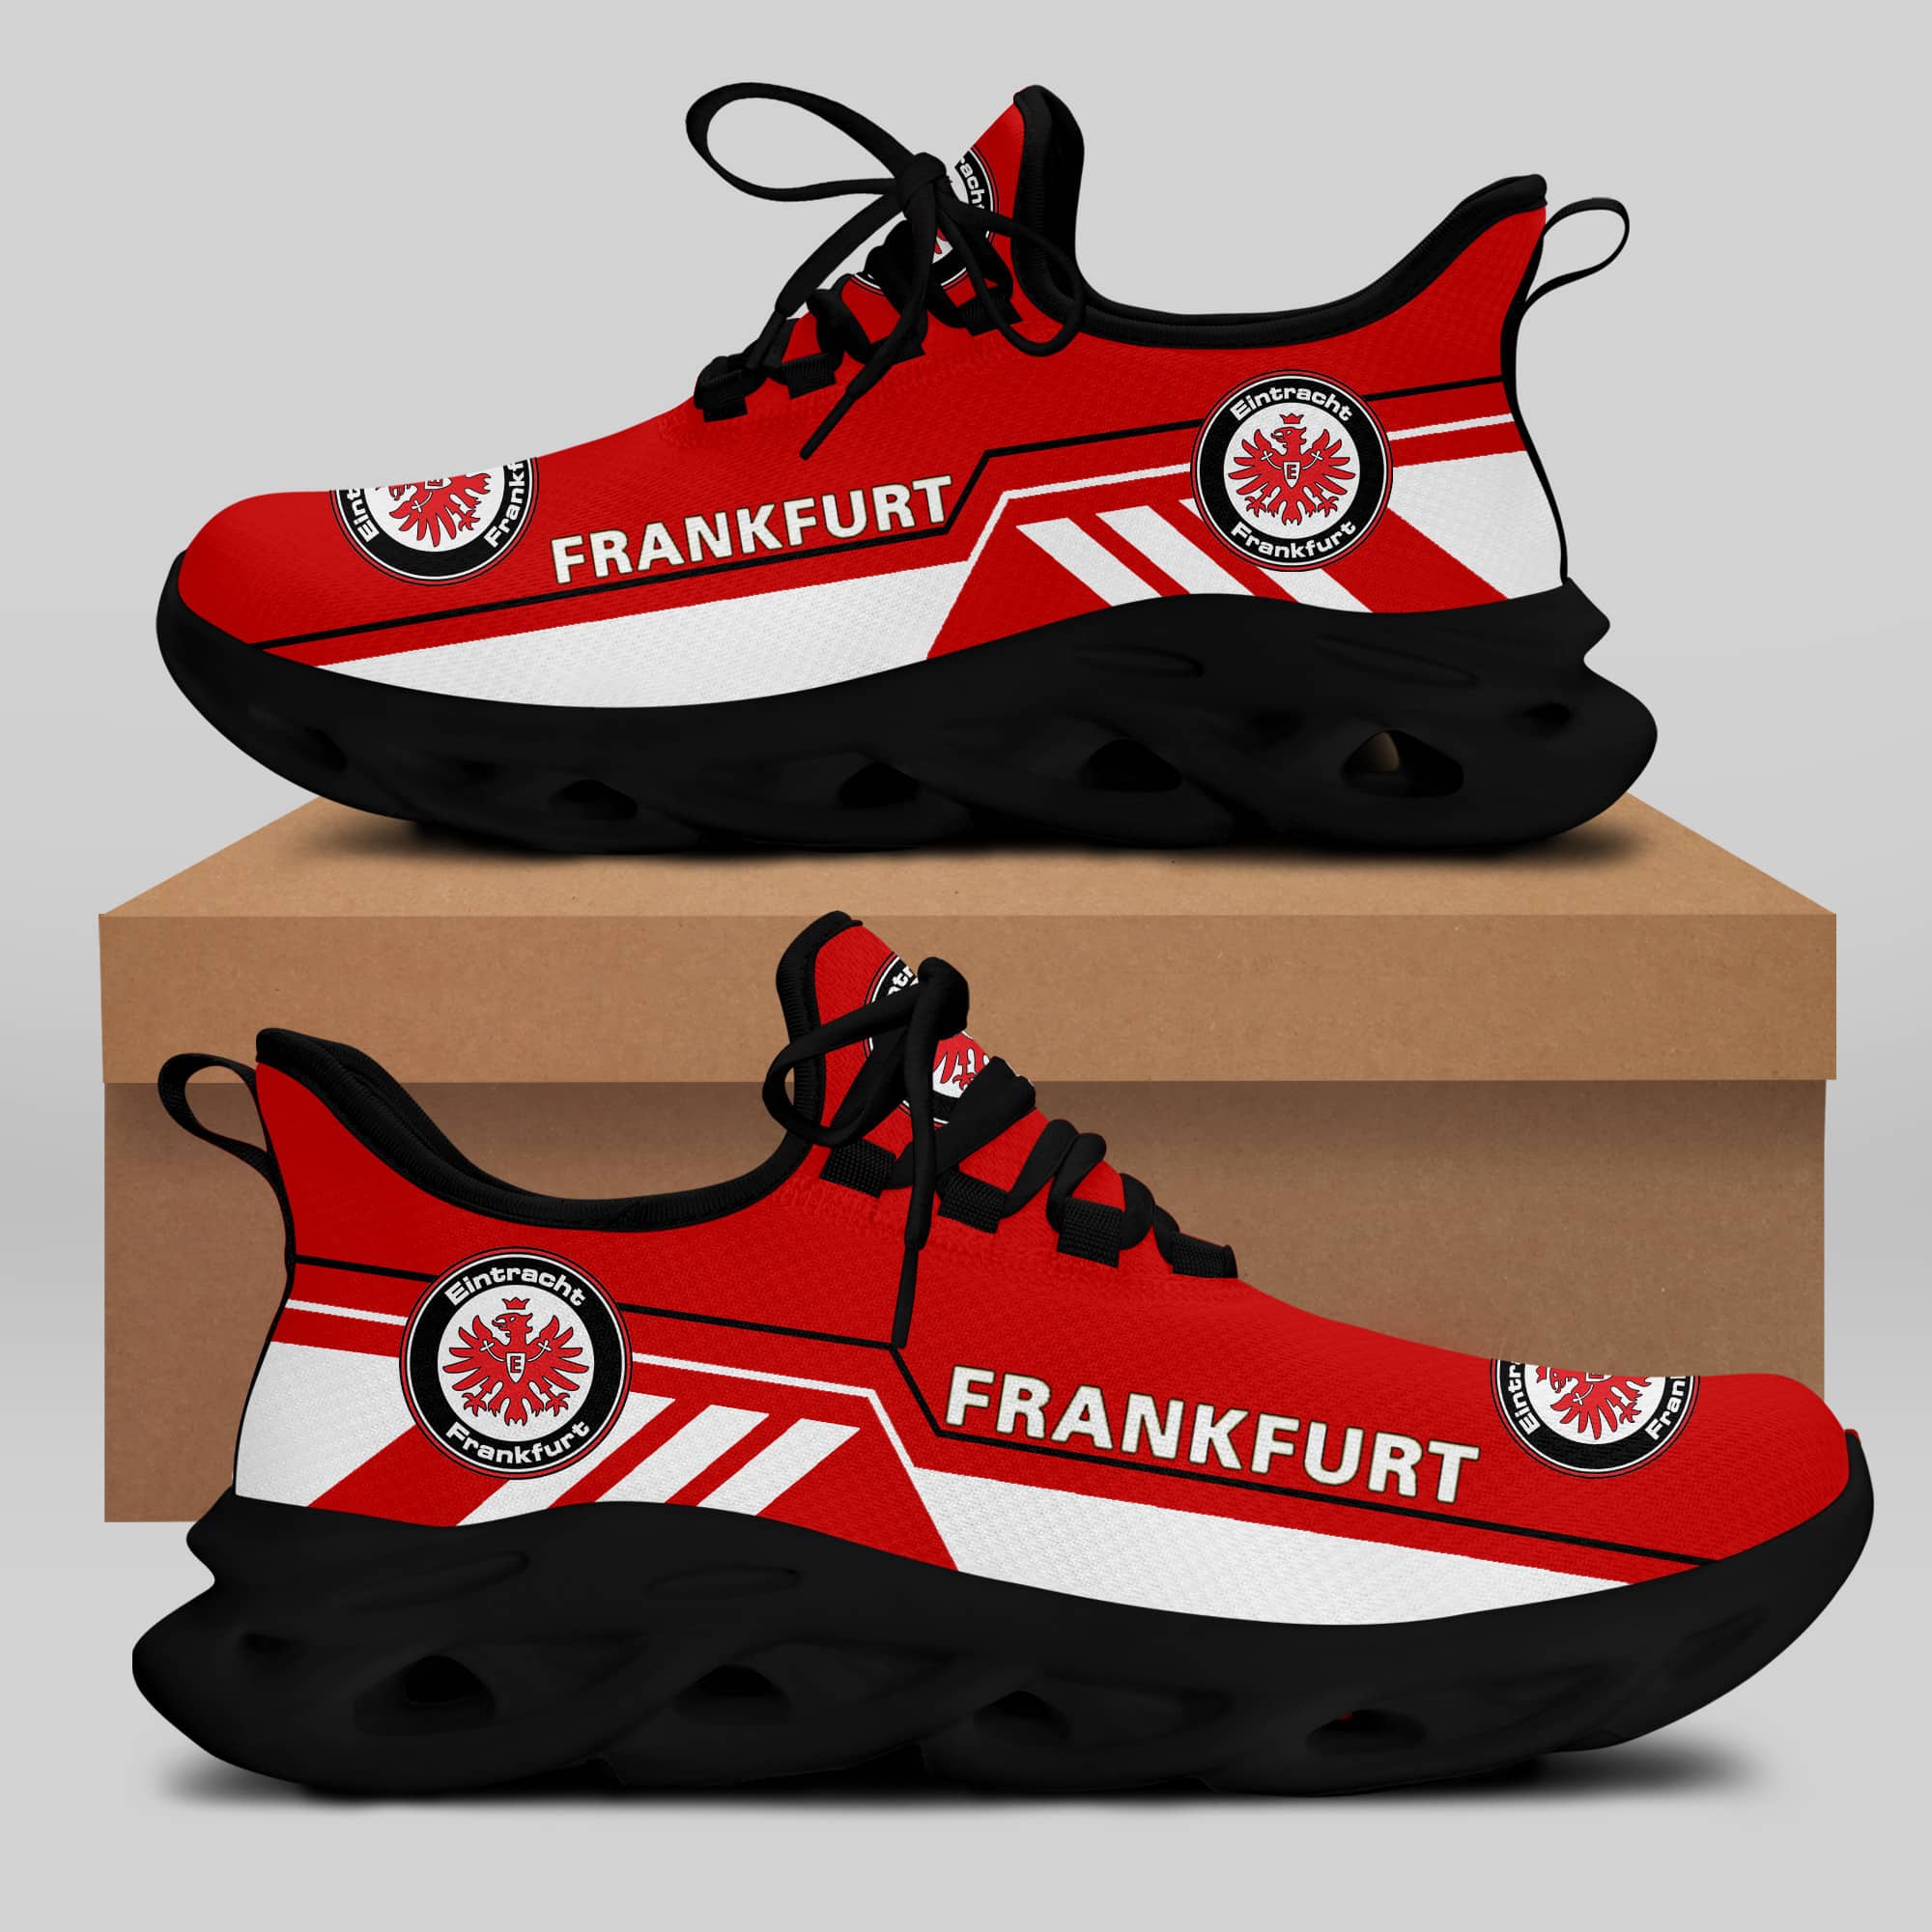 Eintracht Frankfurt Running Shoes Max Soul Shoes Sneakers Ver 11 2